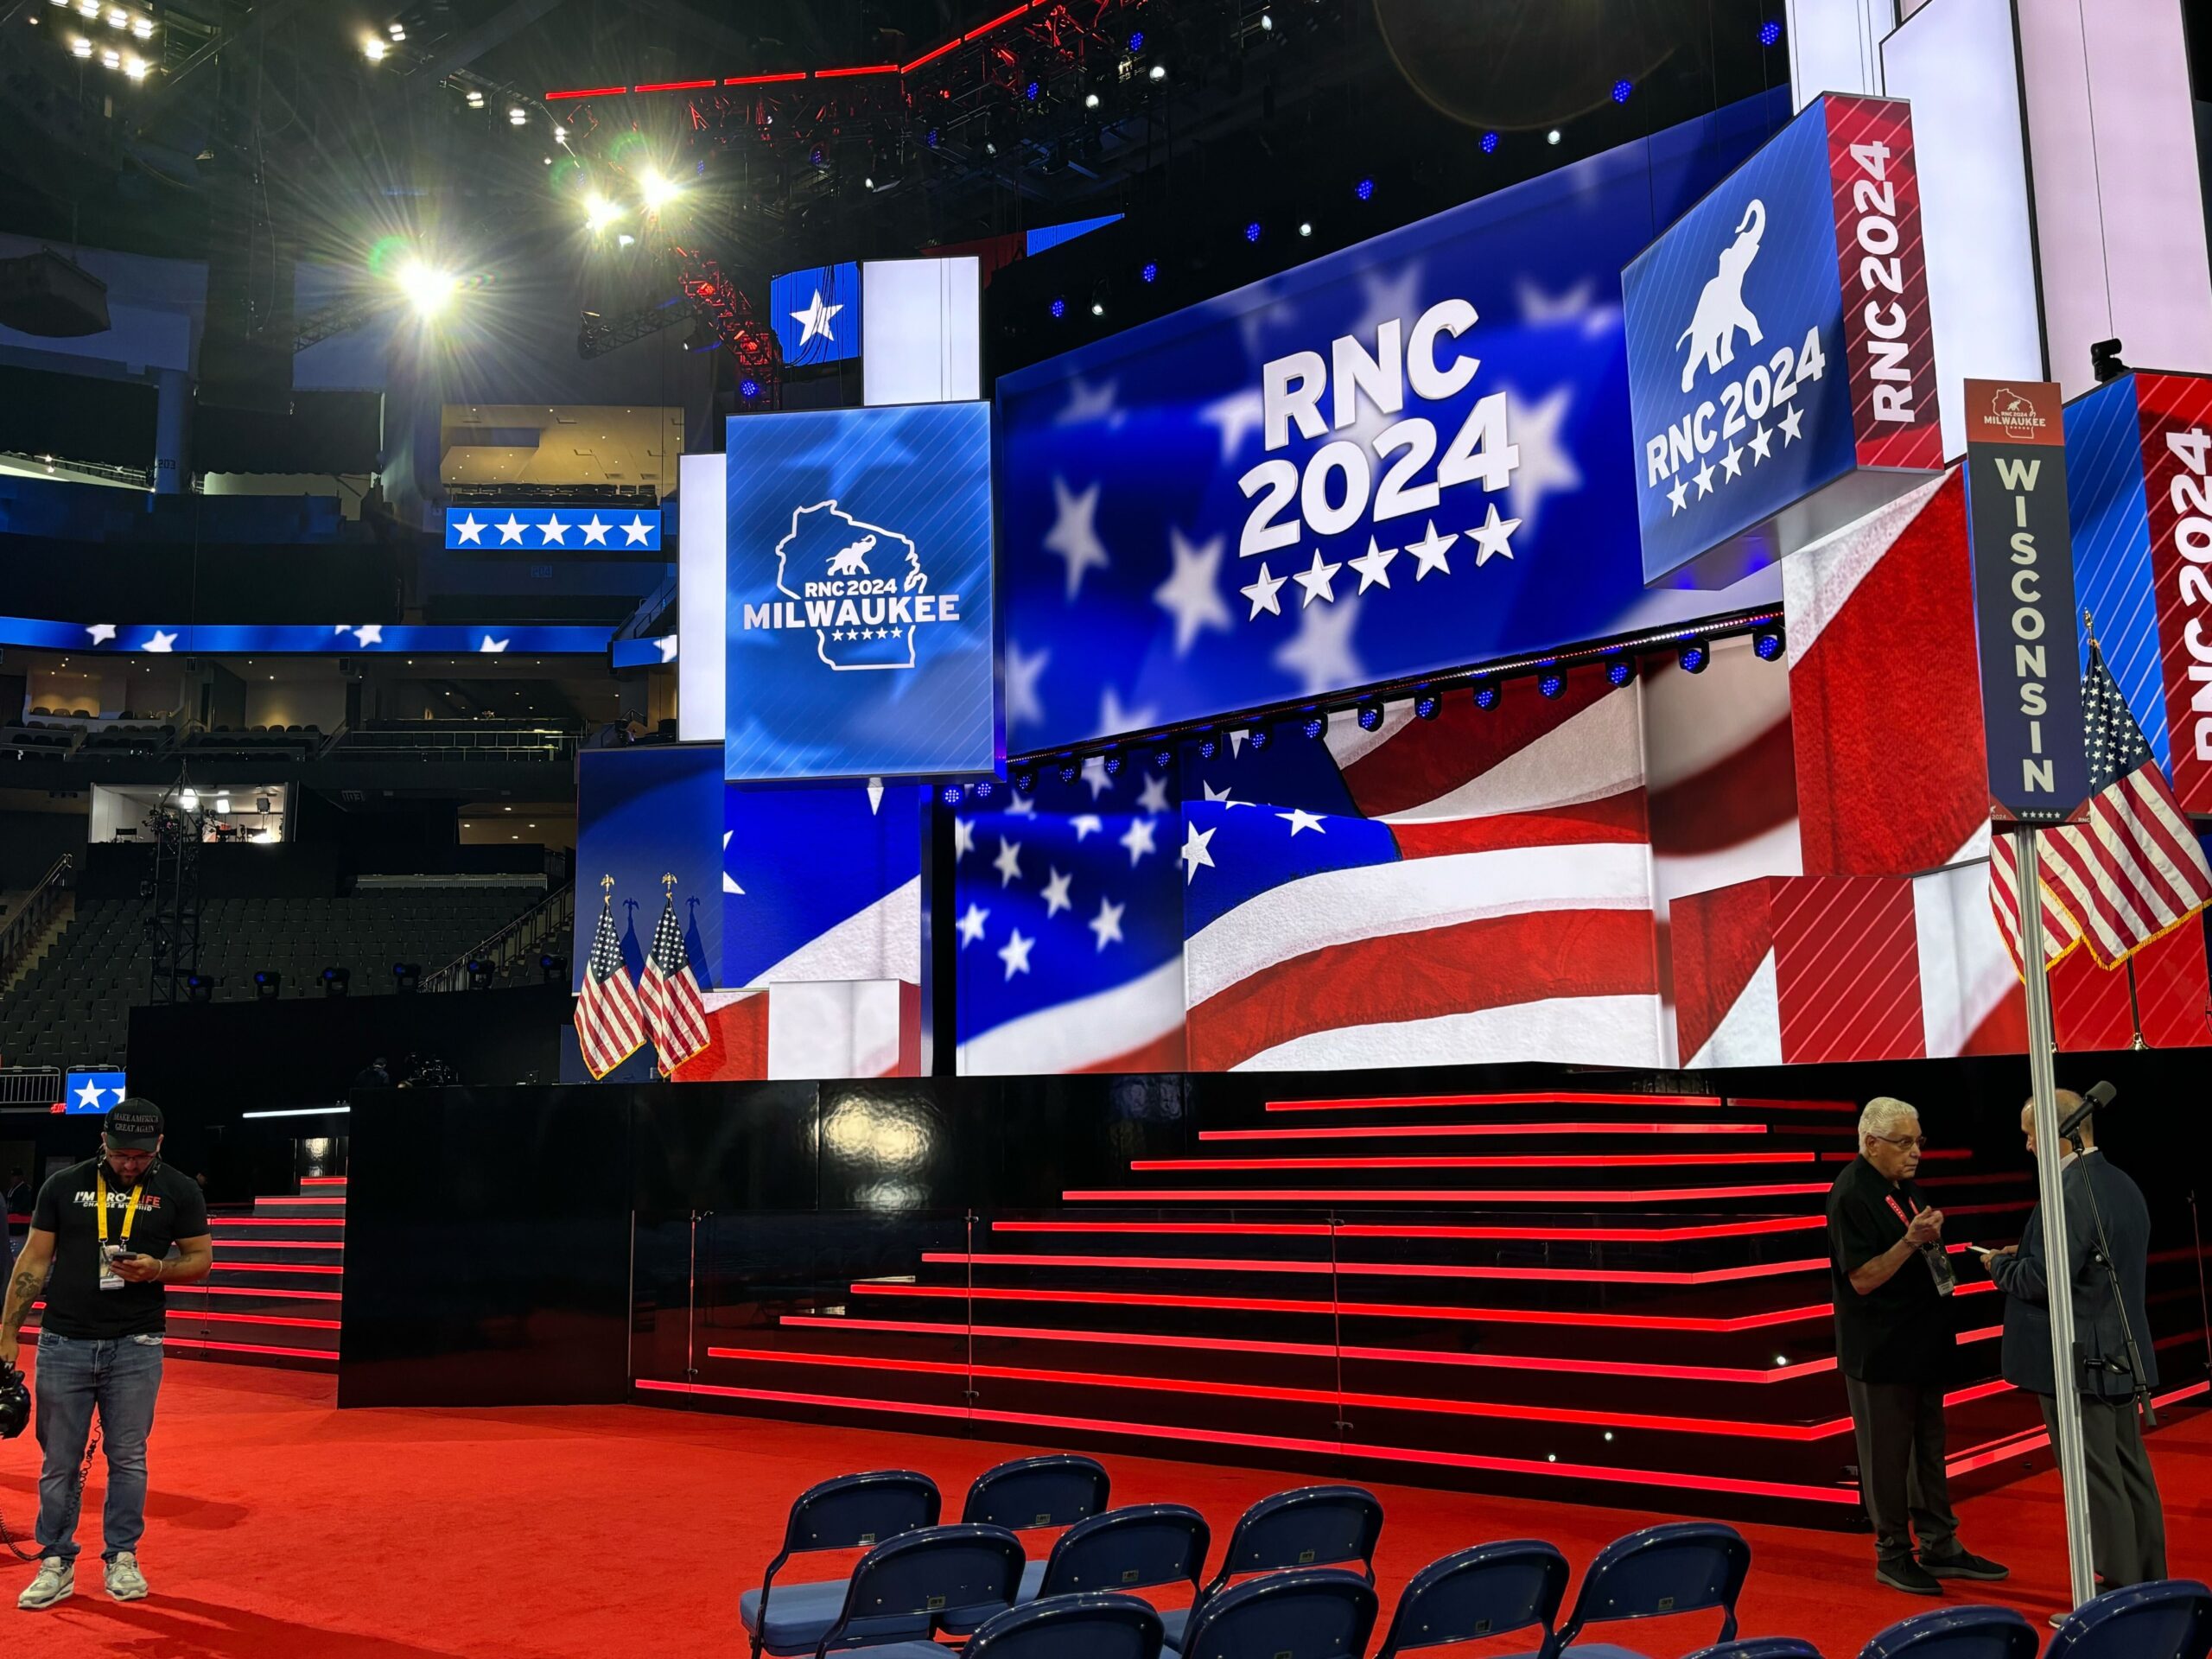 Red, white and blue signs saying "RNC 2024" surround a stage with red stairs. American flags are on either side.